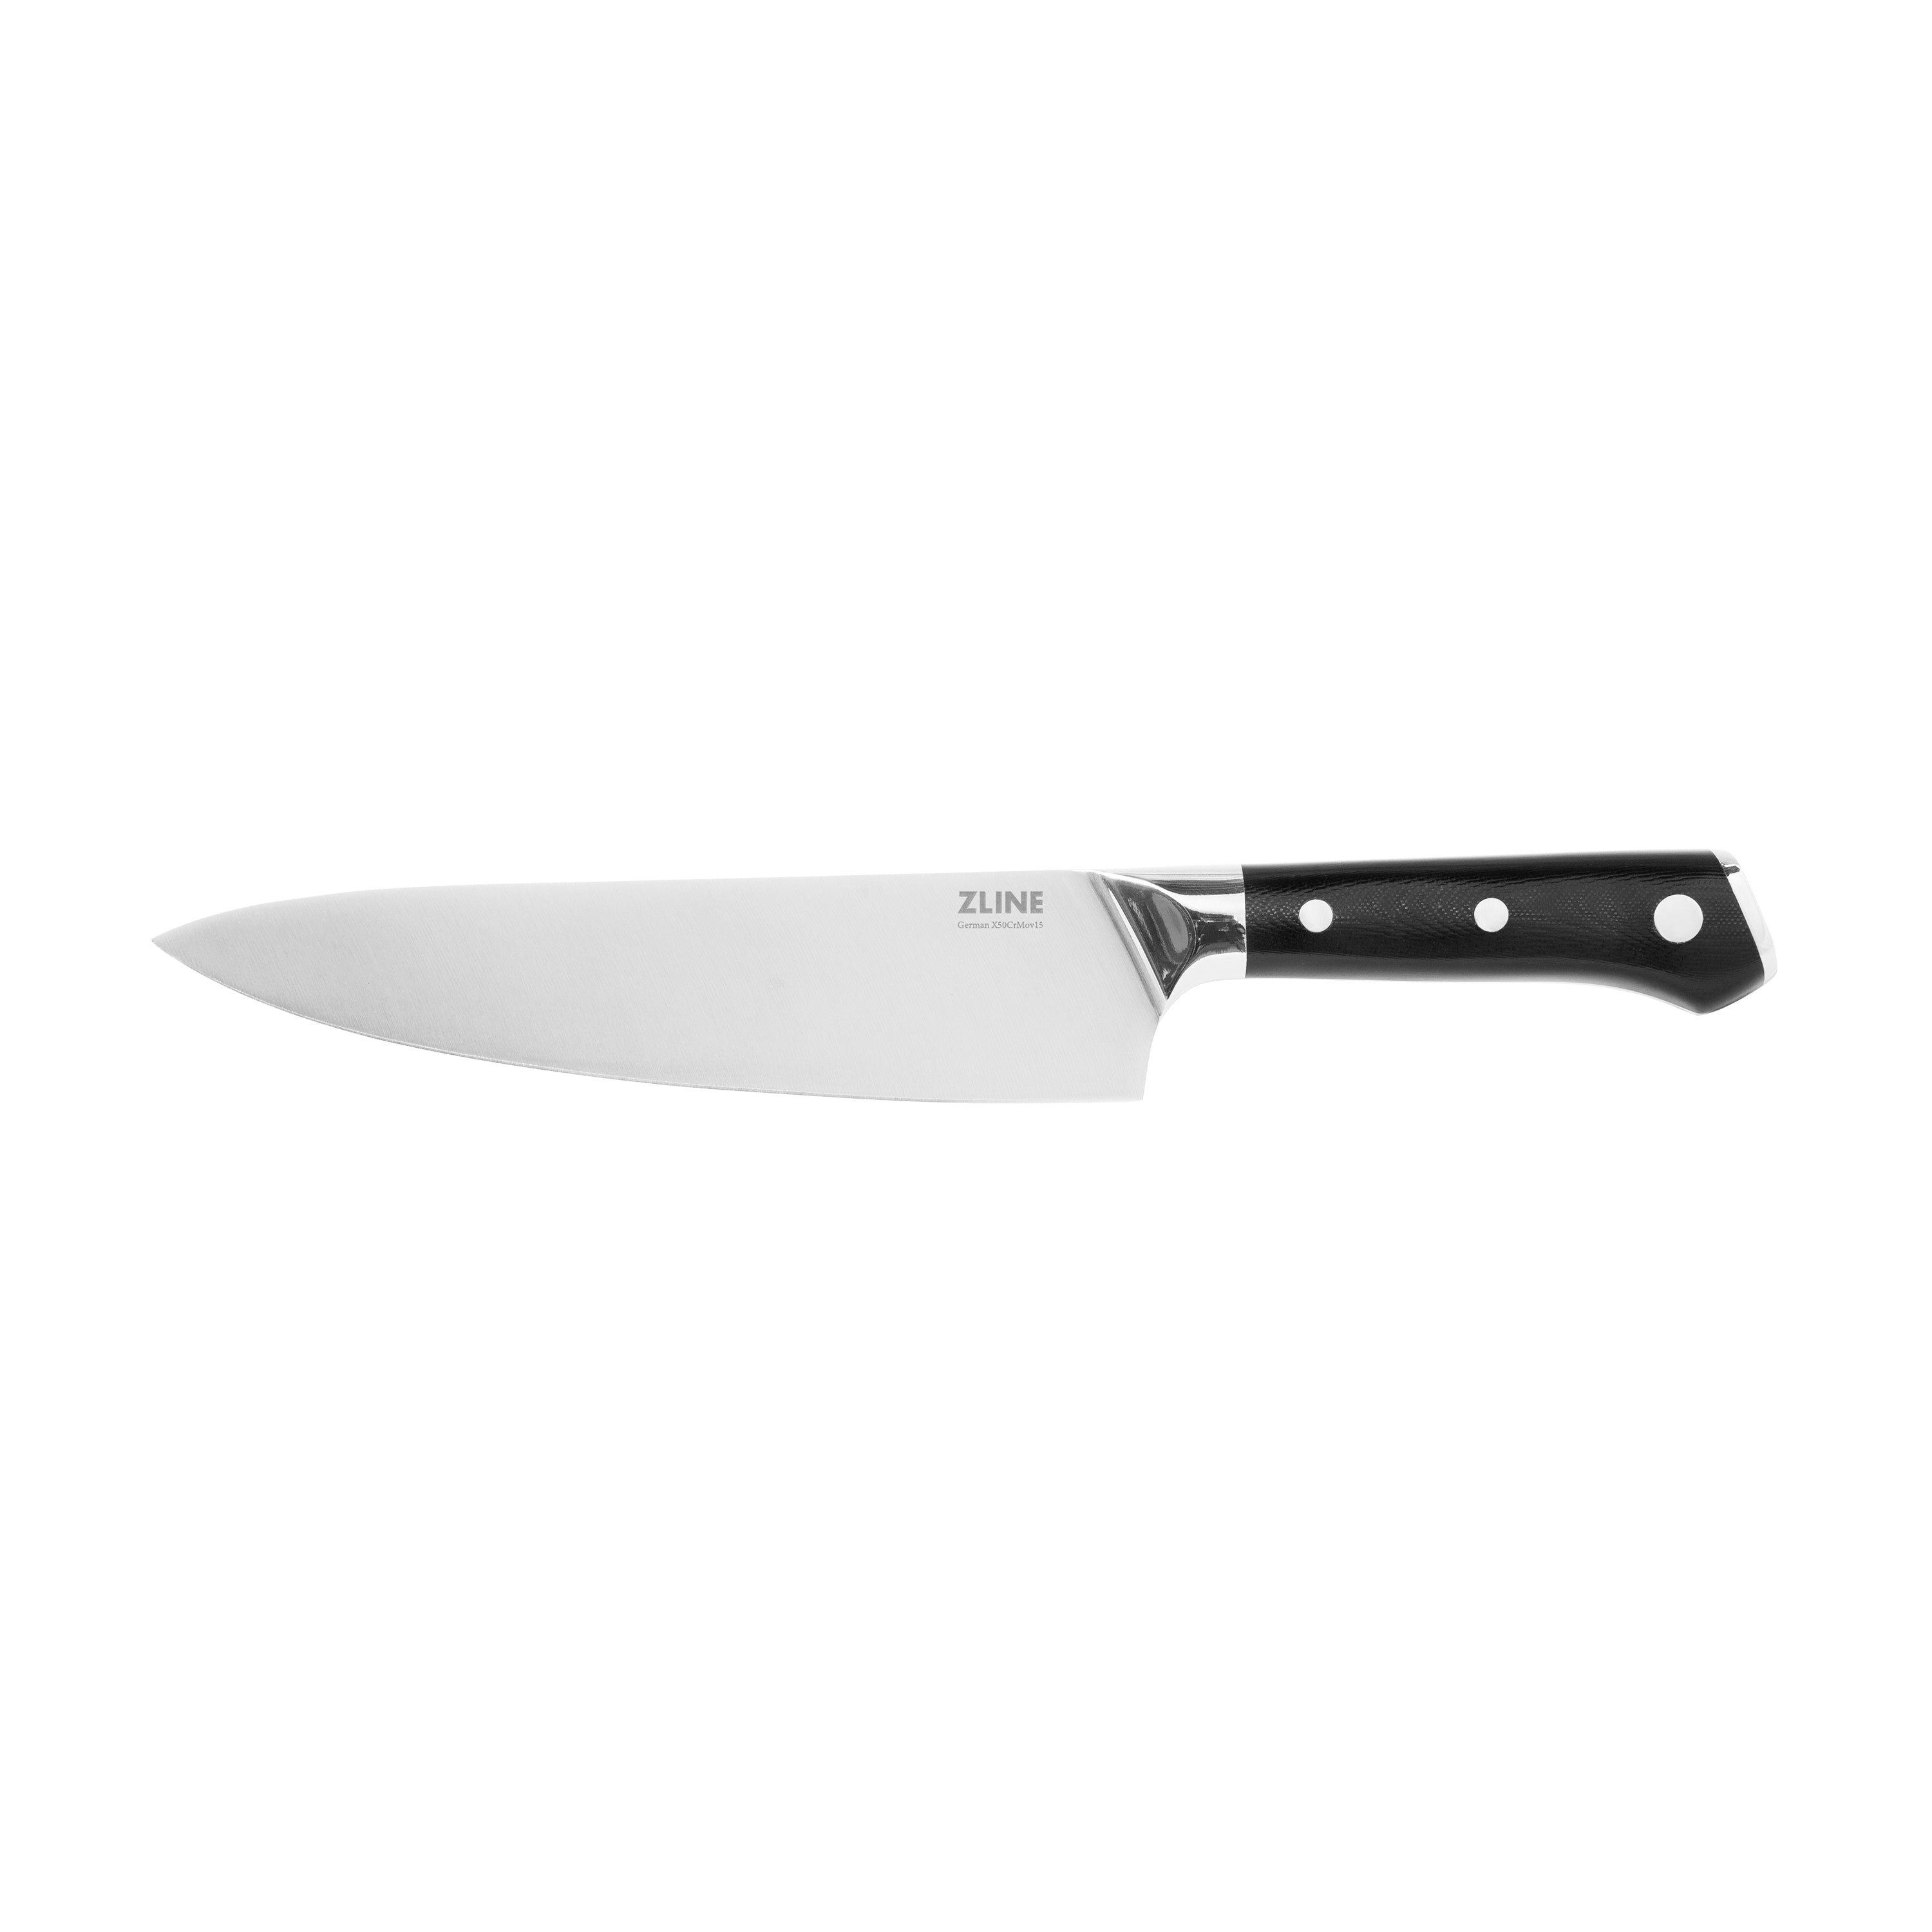 German Steel 8 inch Chef's Knife with G10 Handle